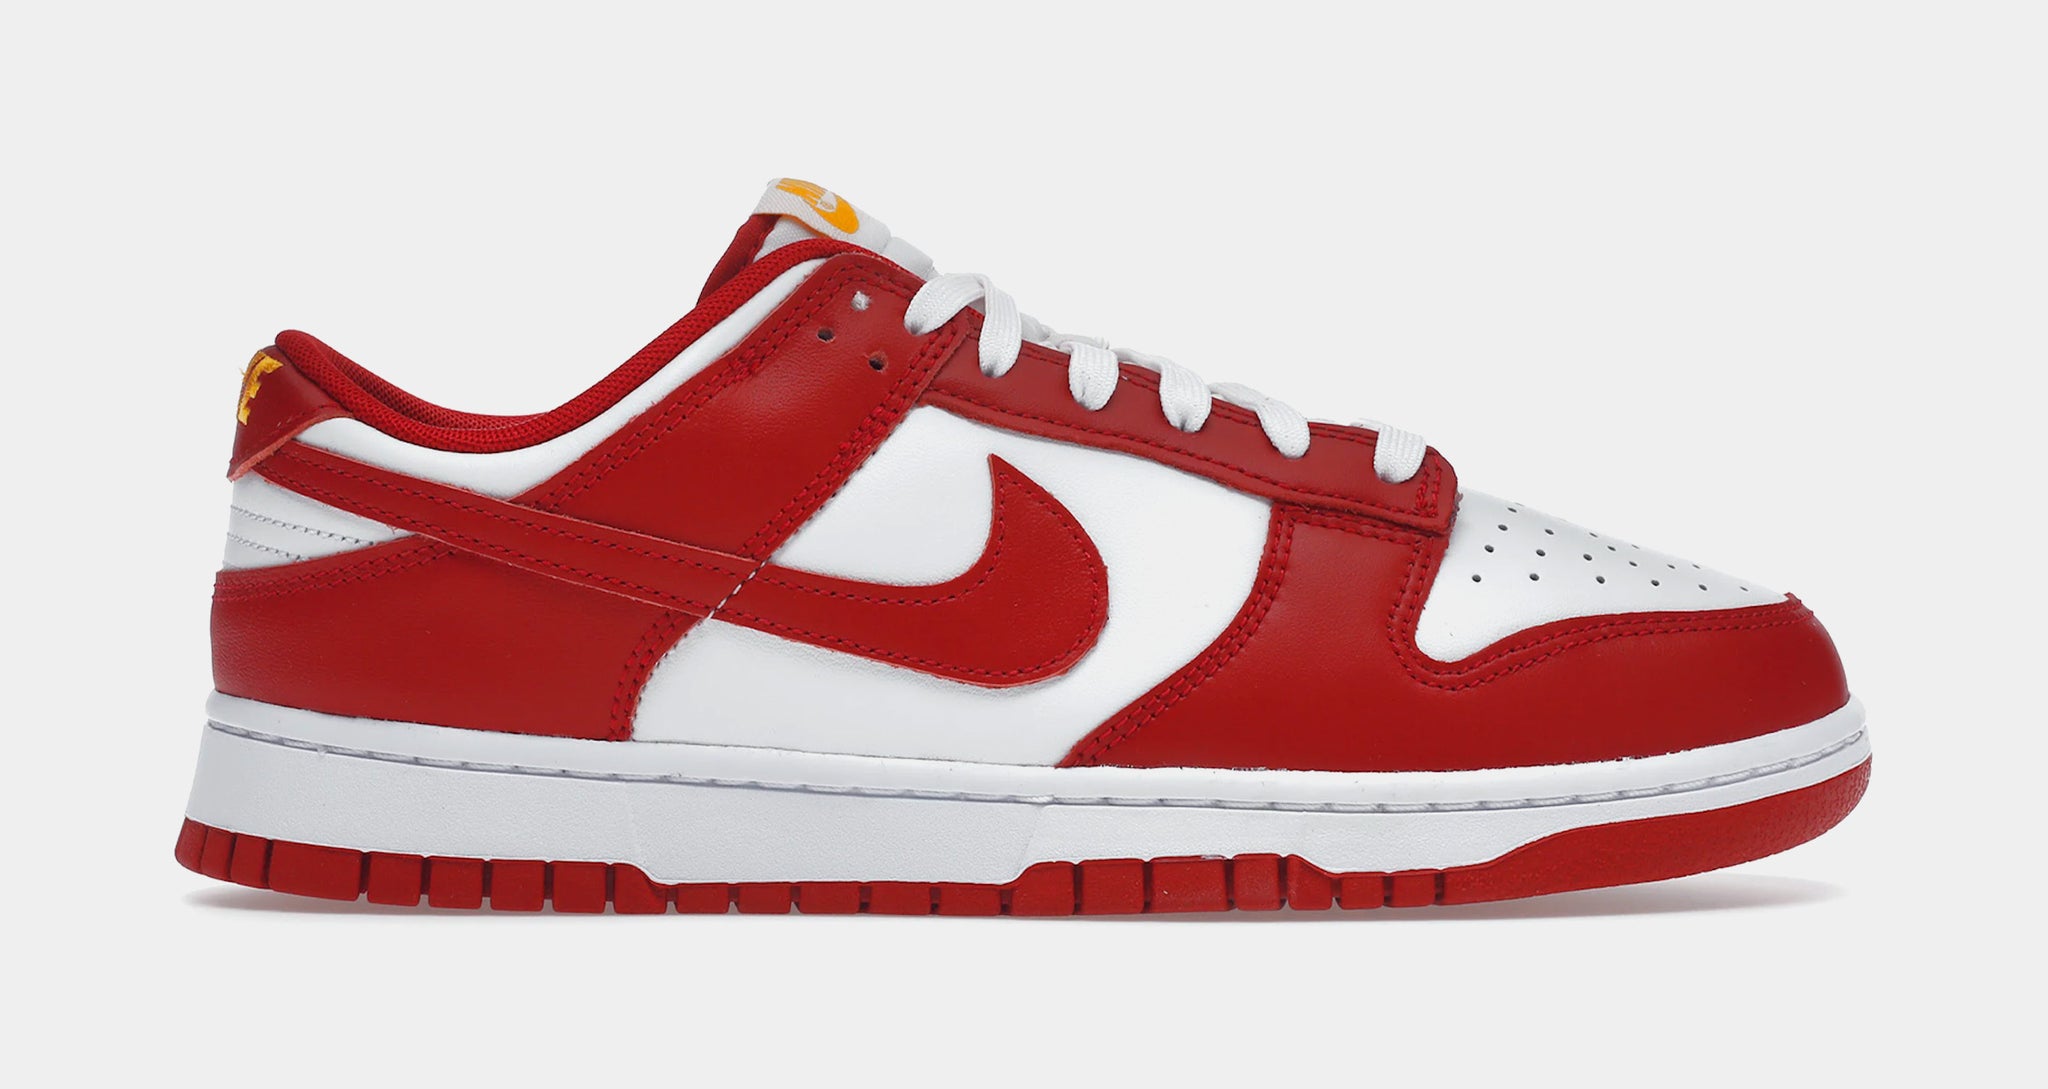 Dunk Low Gym Red Mens Lifestyle Shoes (Red)